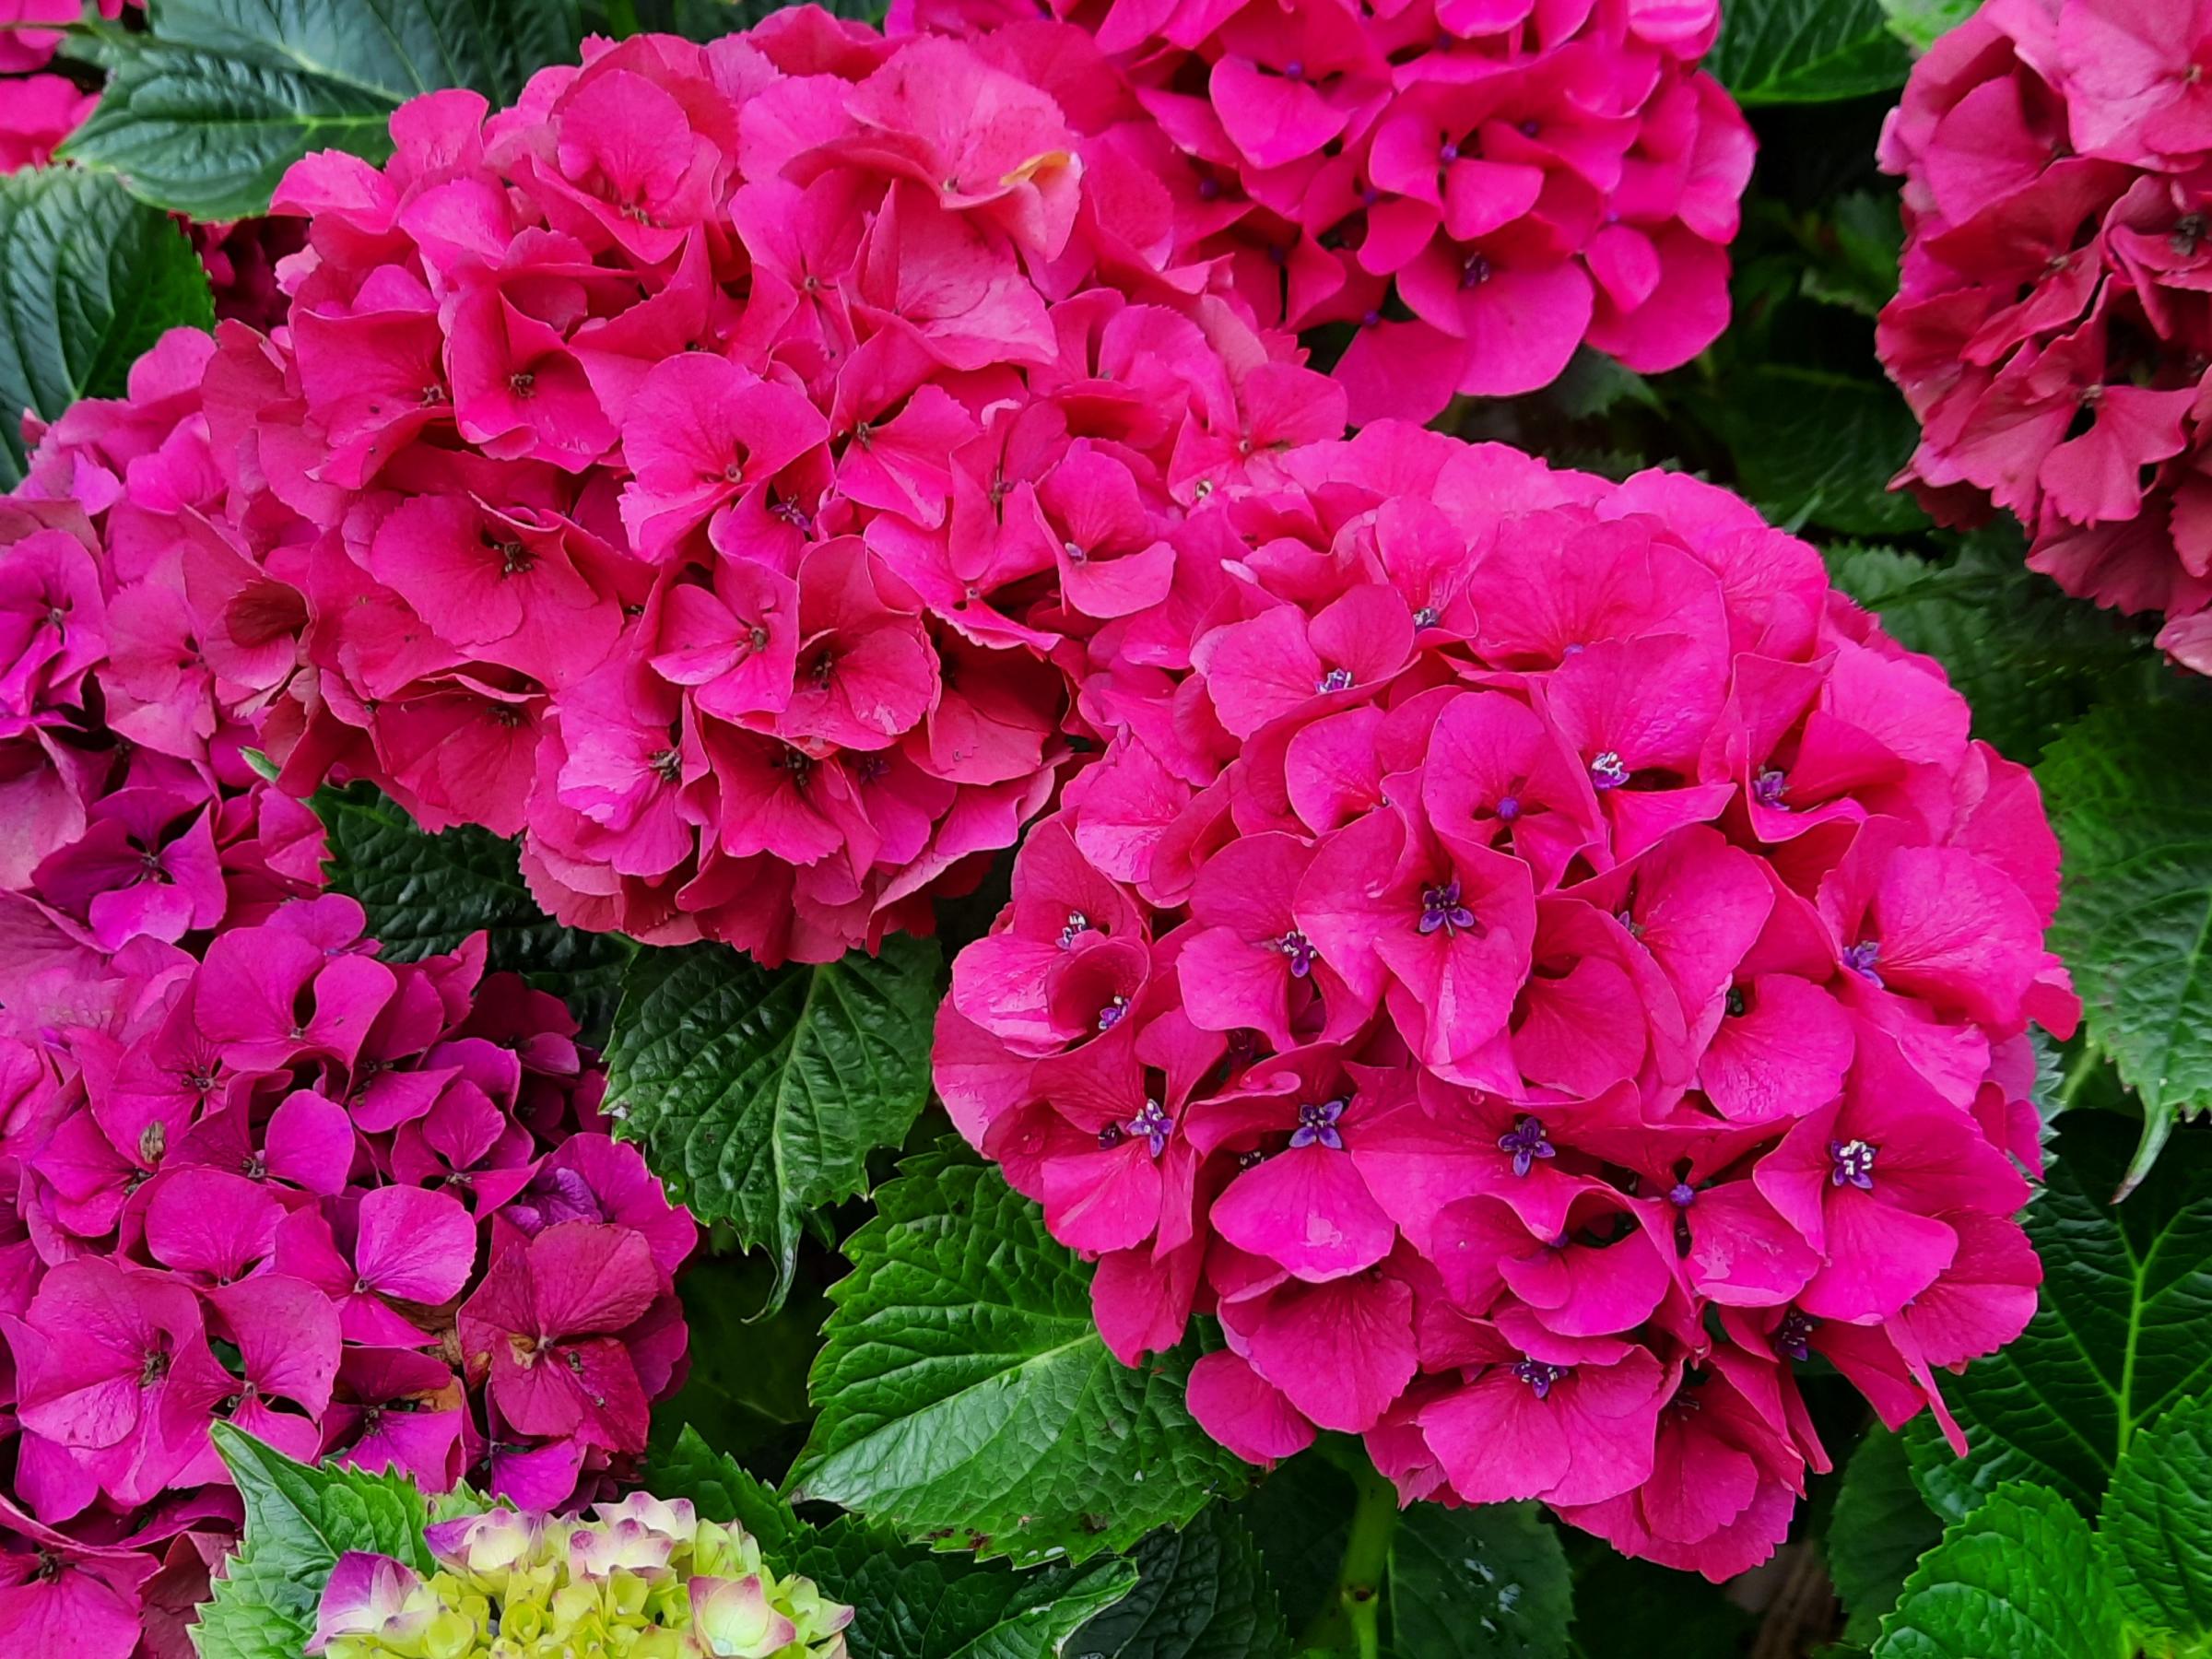 Hydrangea Masja provides reliable flowers for late summer